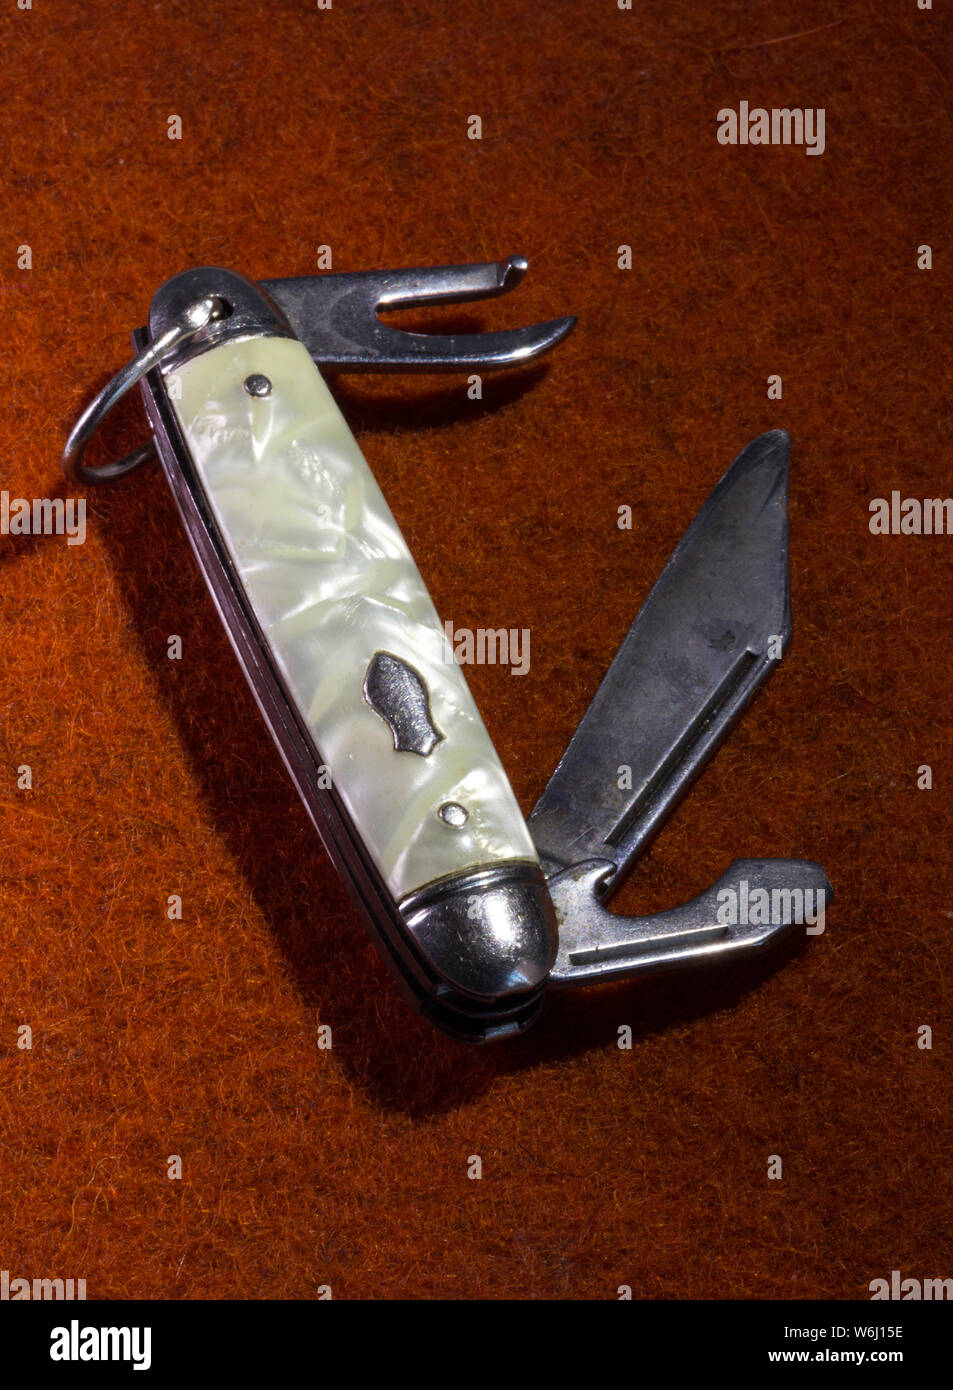 Penknives, Multi-tools and Tactical Pens. Folding Pocket Knives on a Khaki  Back Stock Photo - Image of utility, lock: 274798684